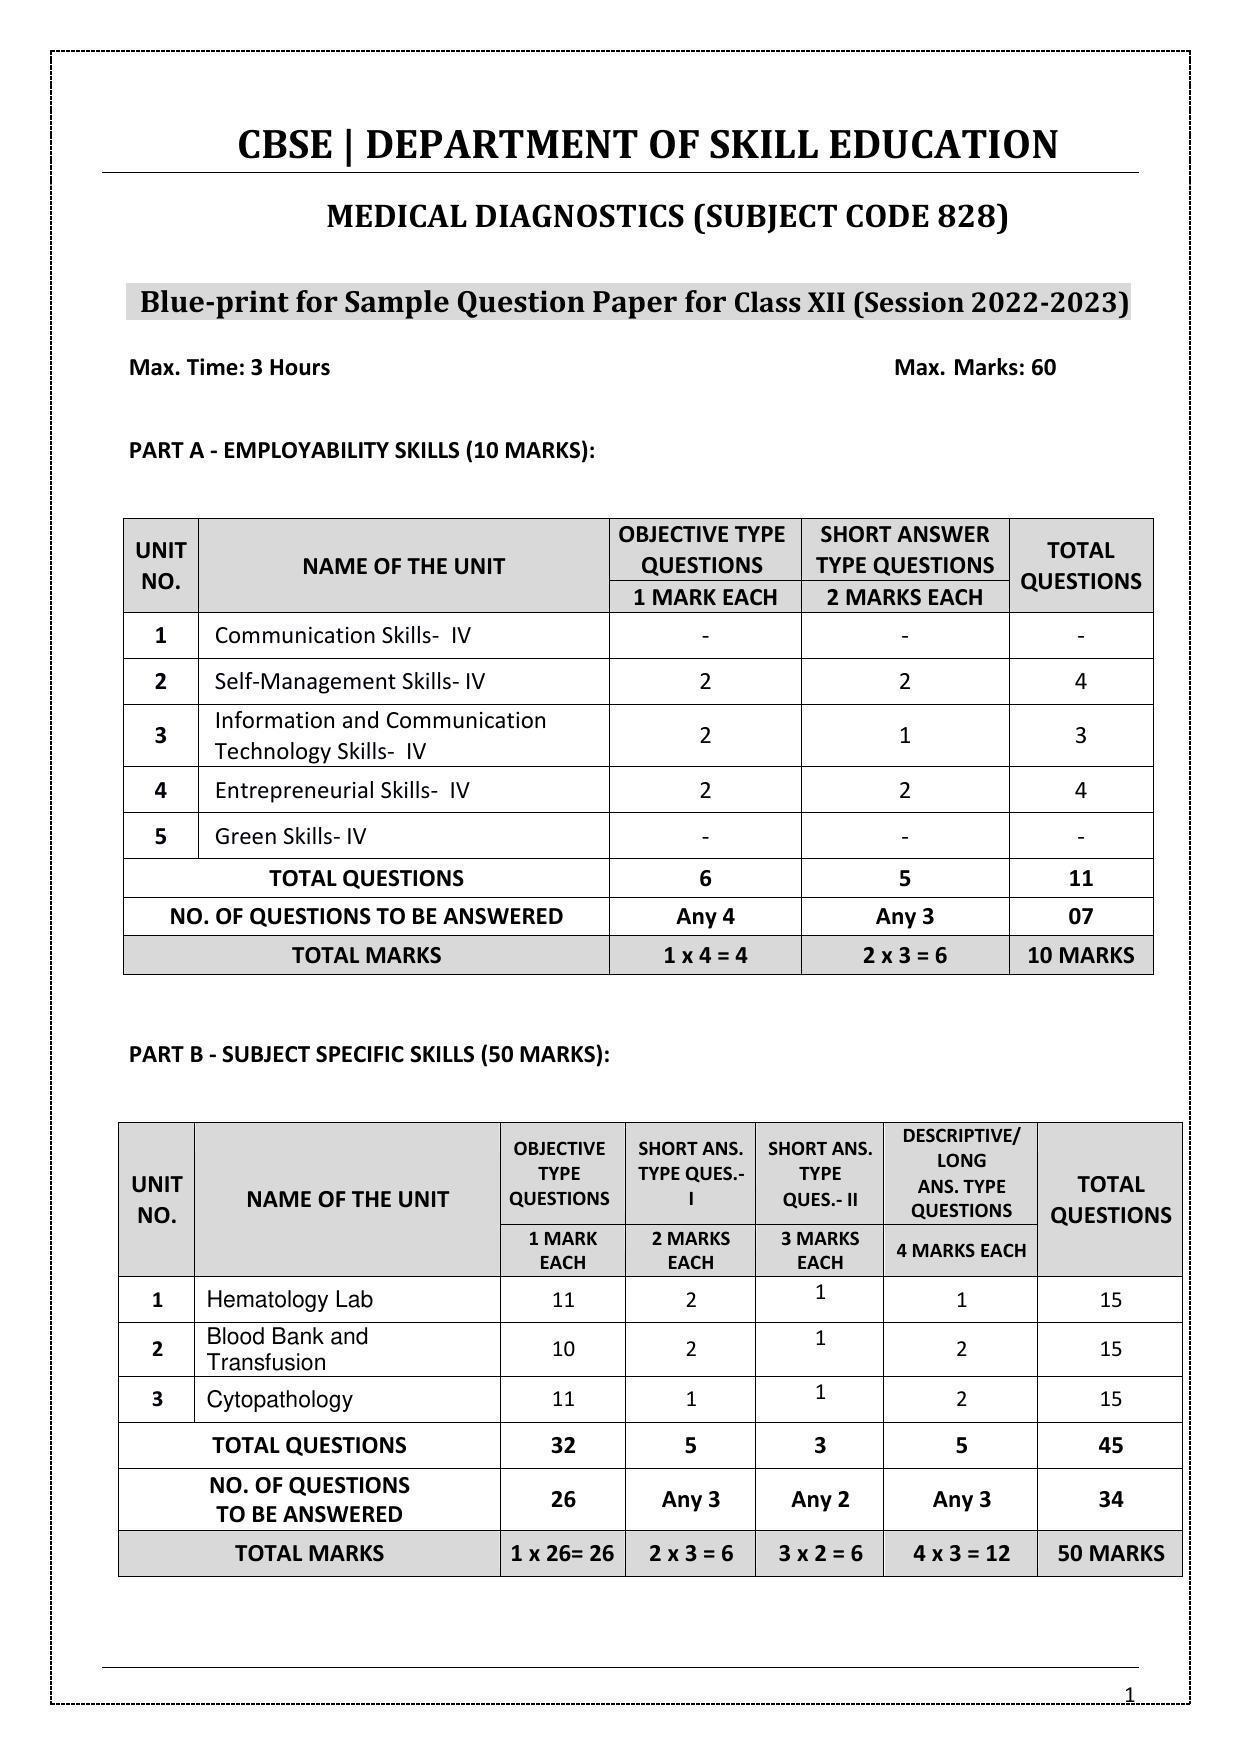 CBSE Class 12 Medical Diagnostics (Skill Education) Sample Papers 2023 - Page 1